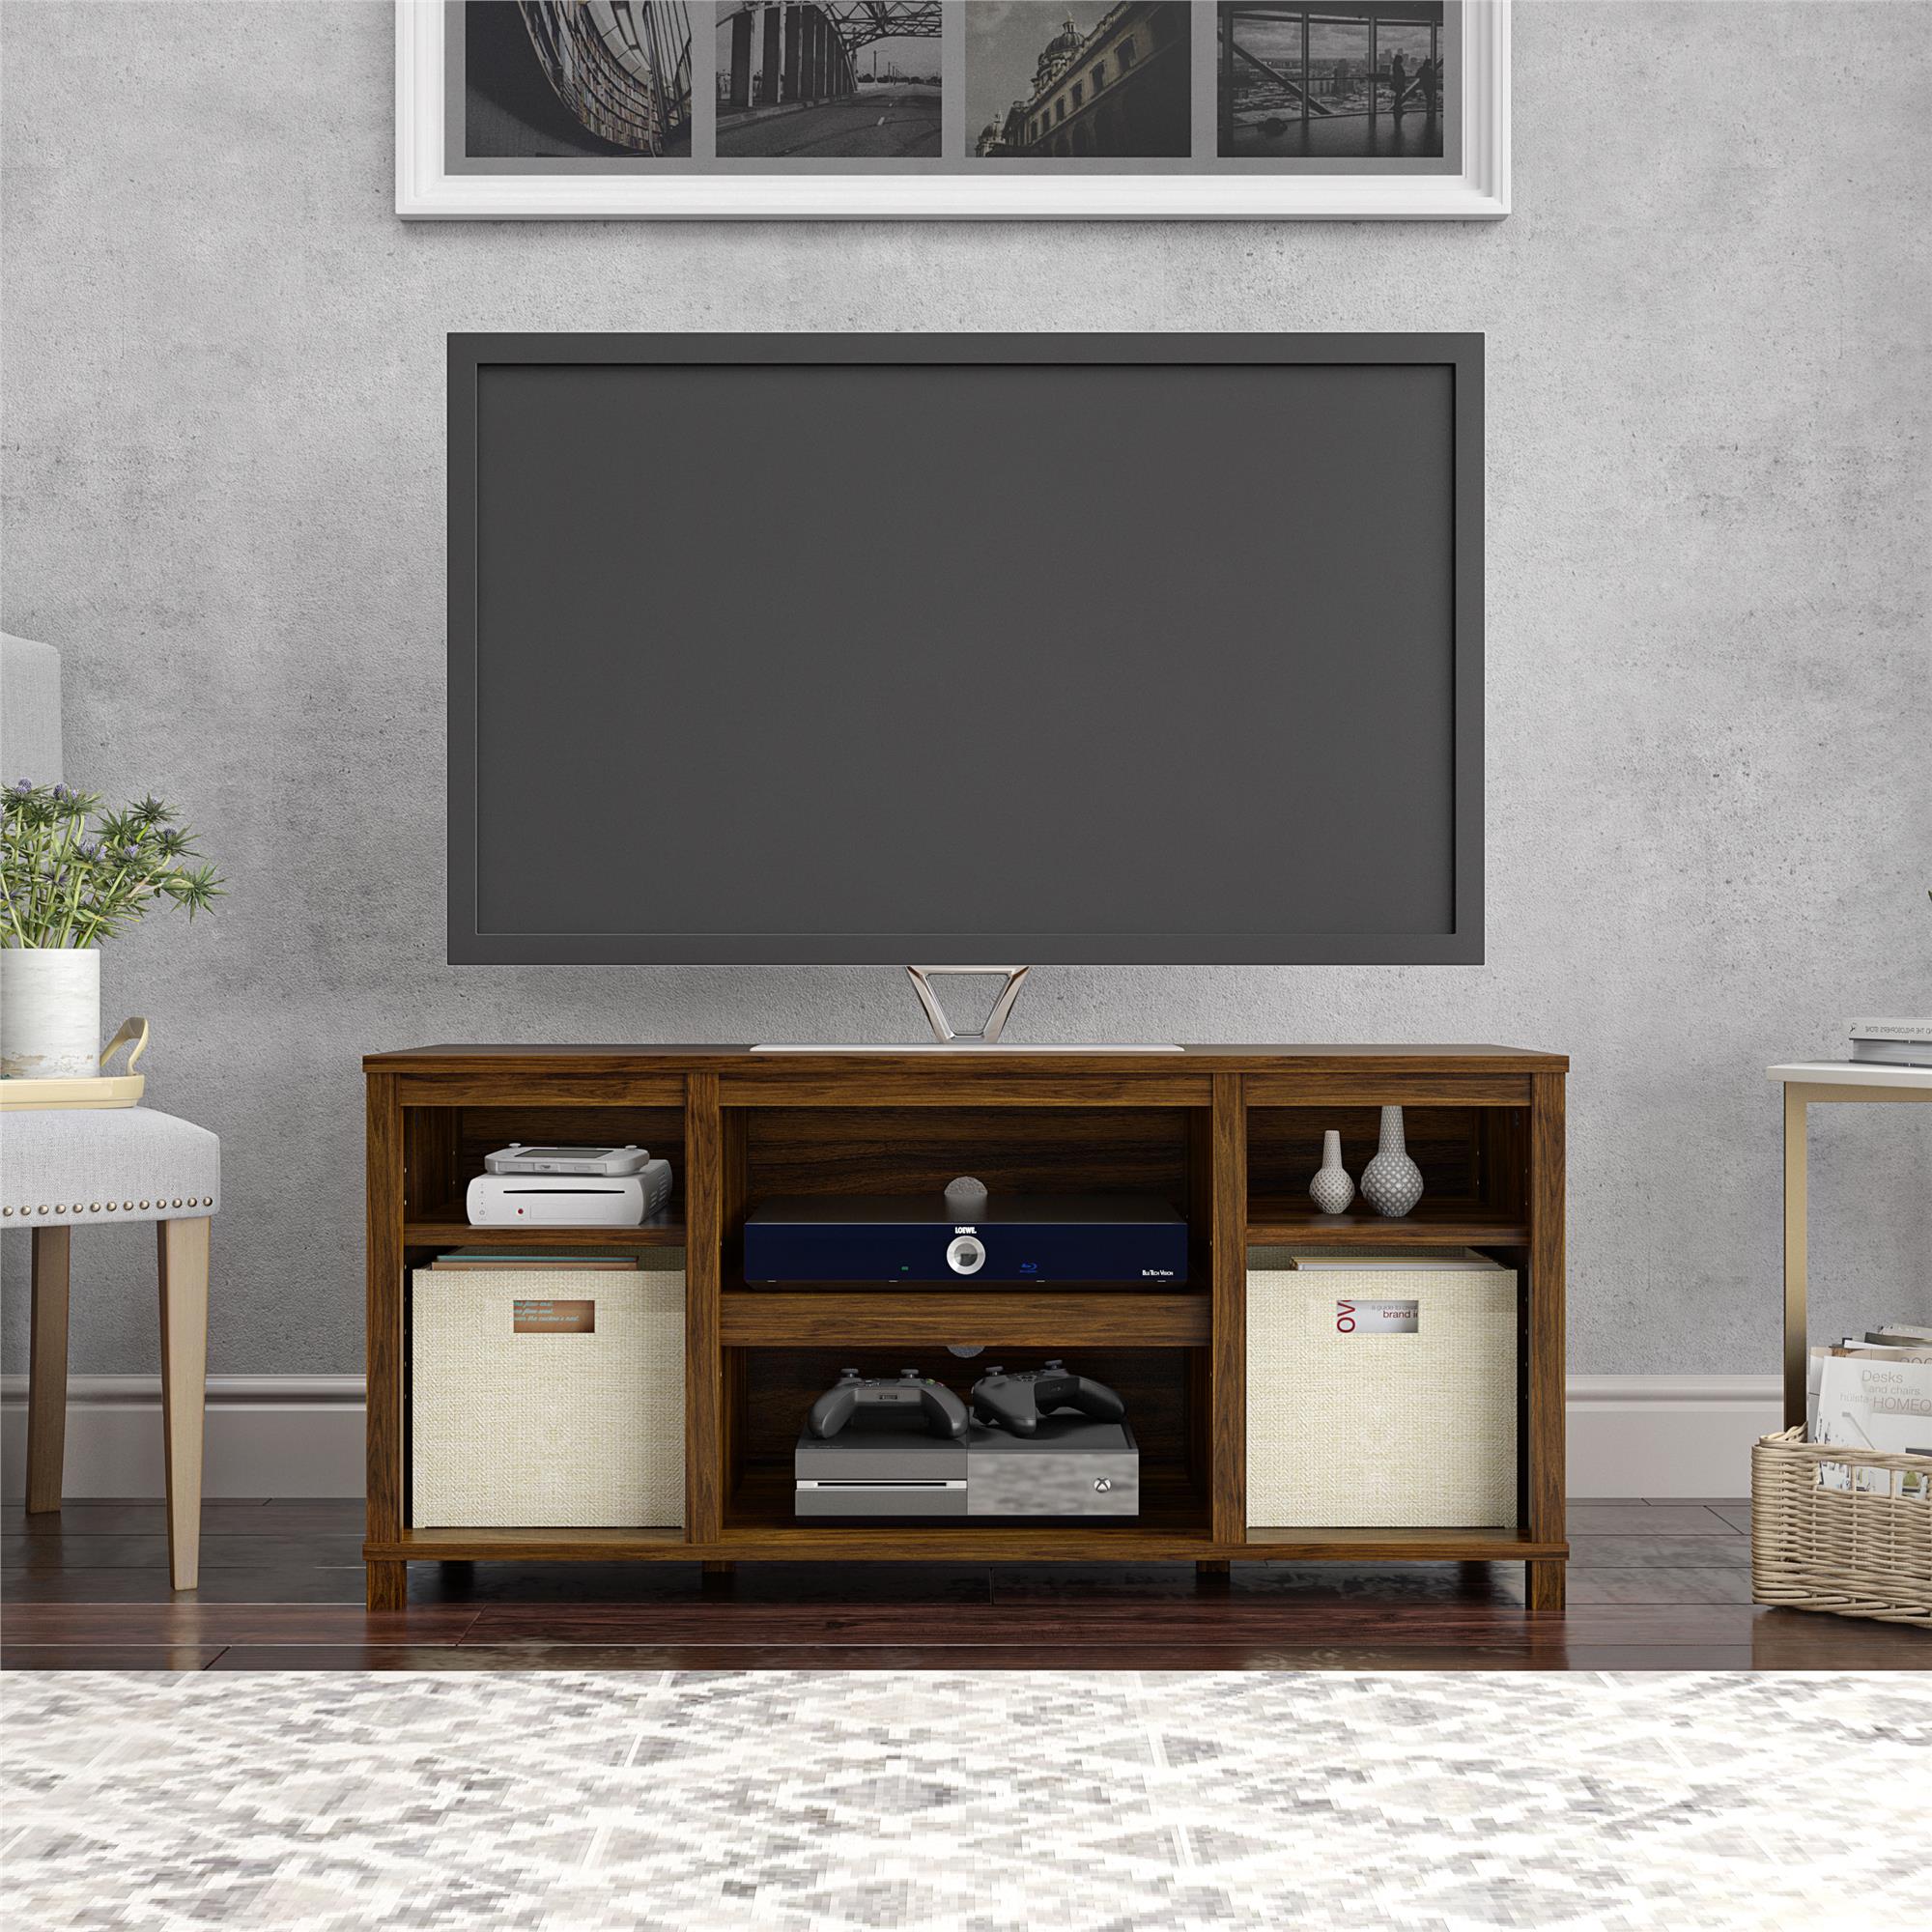 Mainstays Parsons TV Stand for TVs up to 50", Canyon Walnut - image 1 of 15